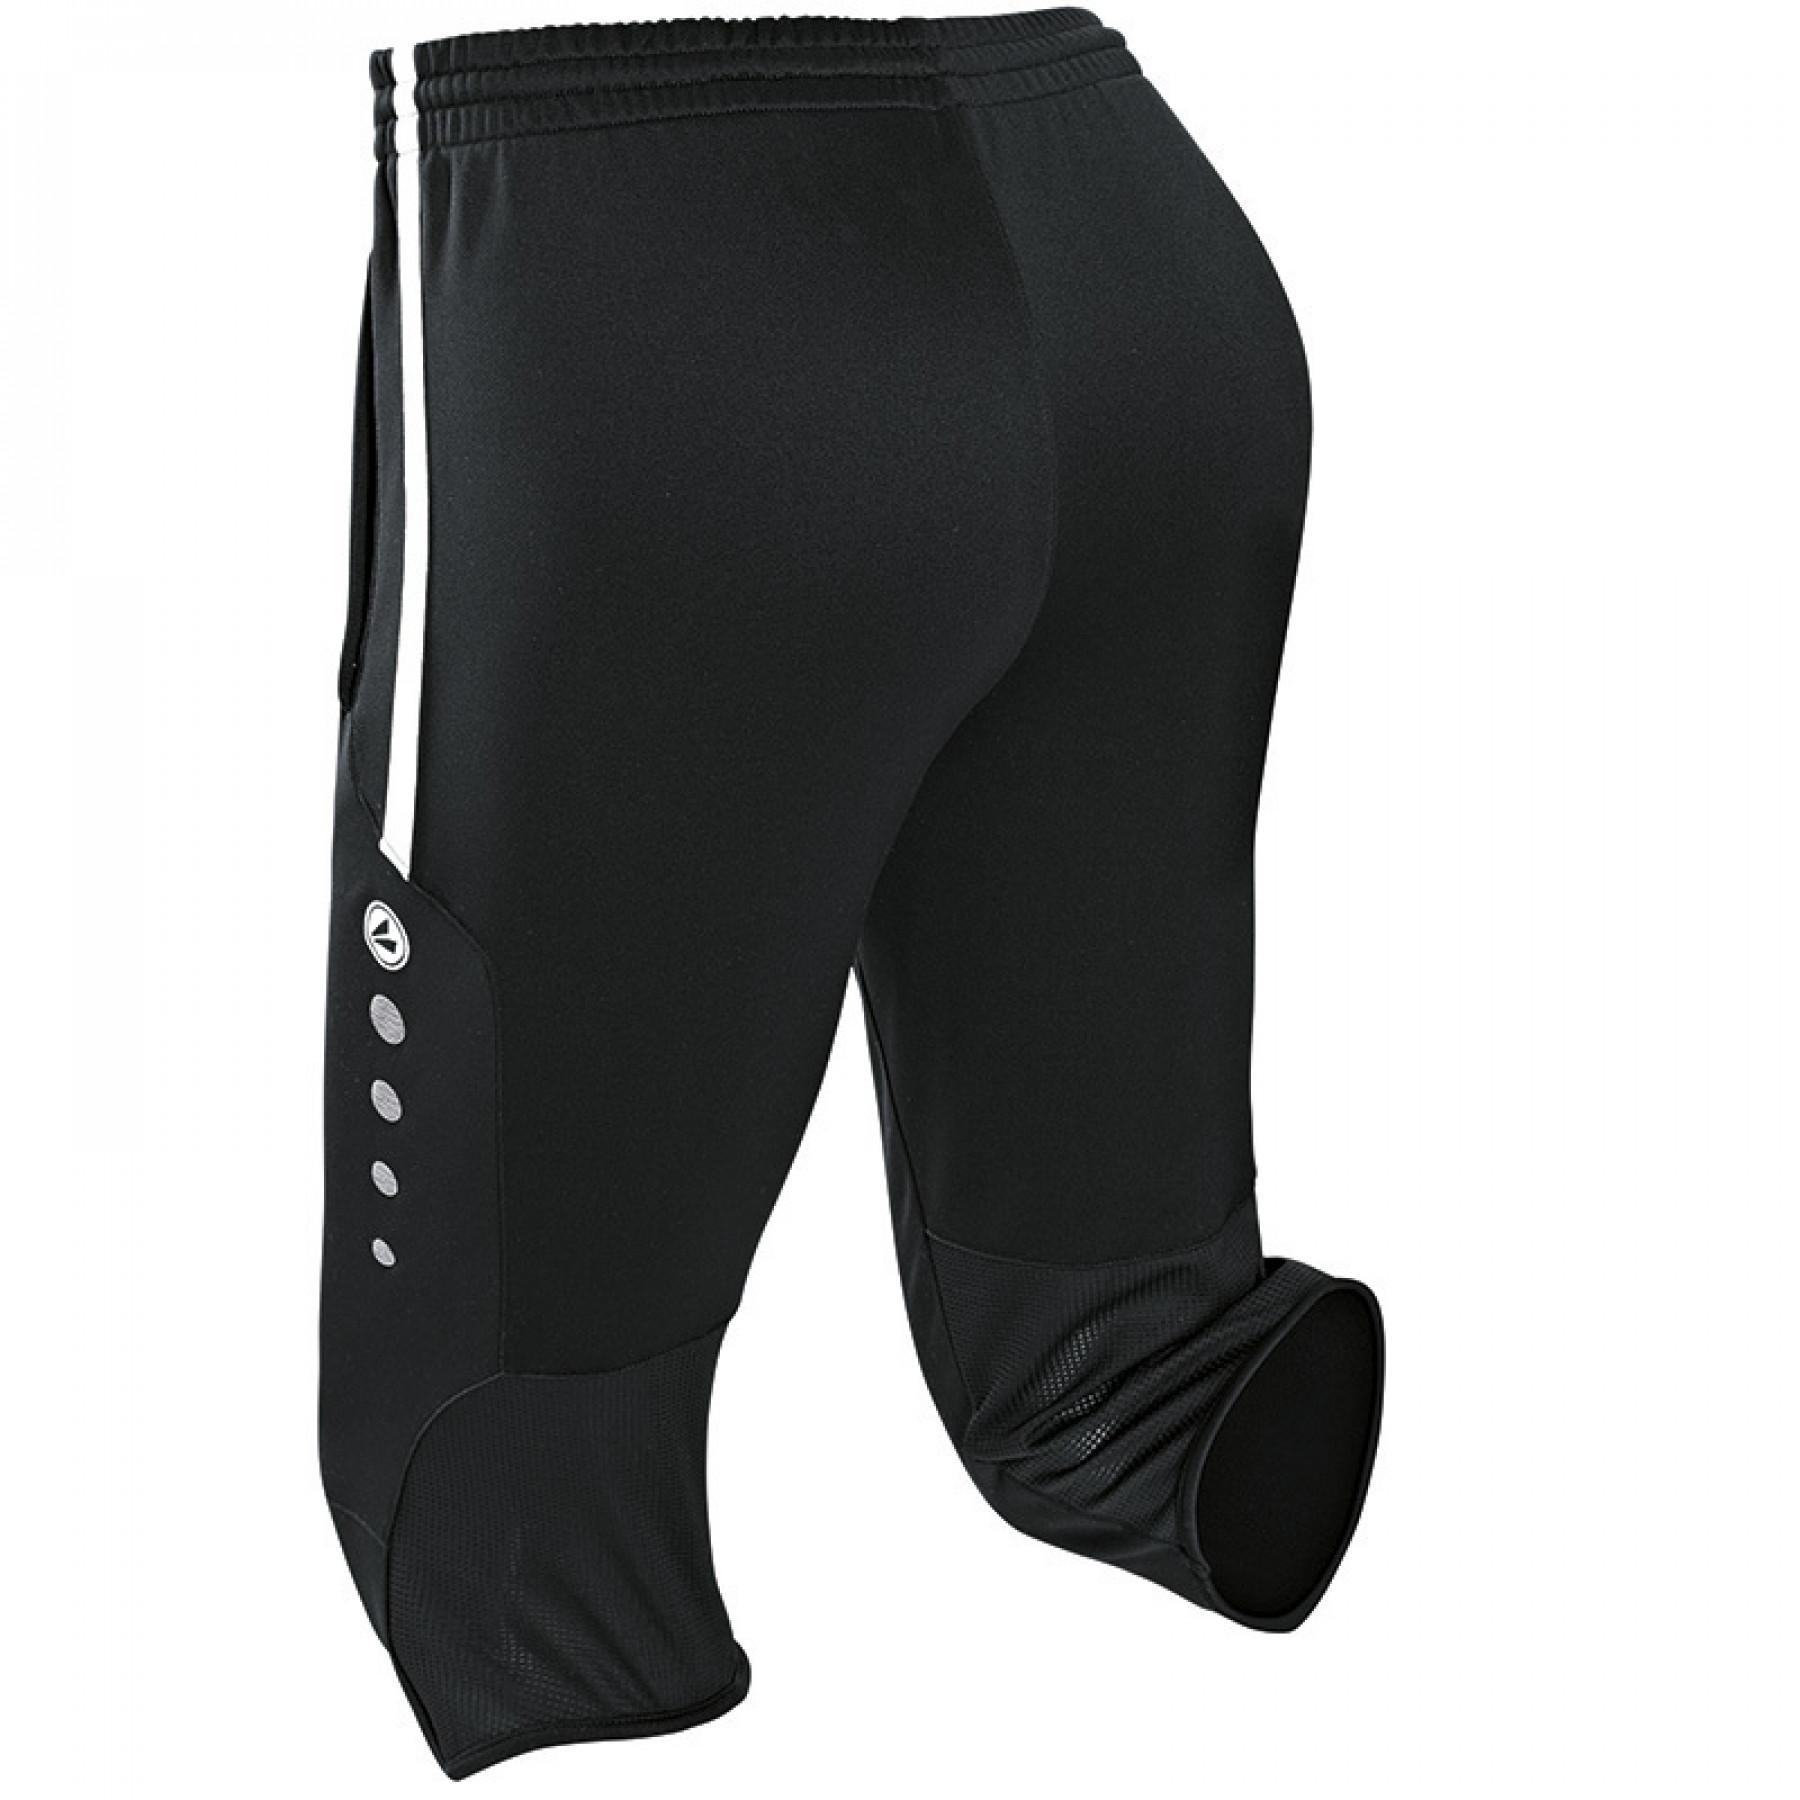 3/4 active training shorts for kids